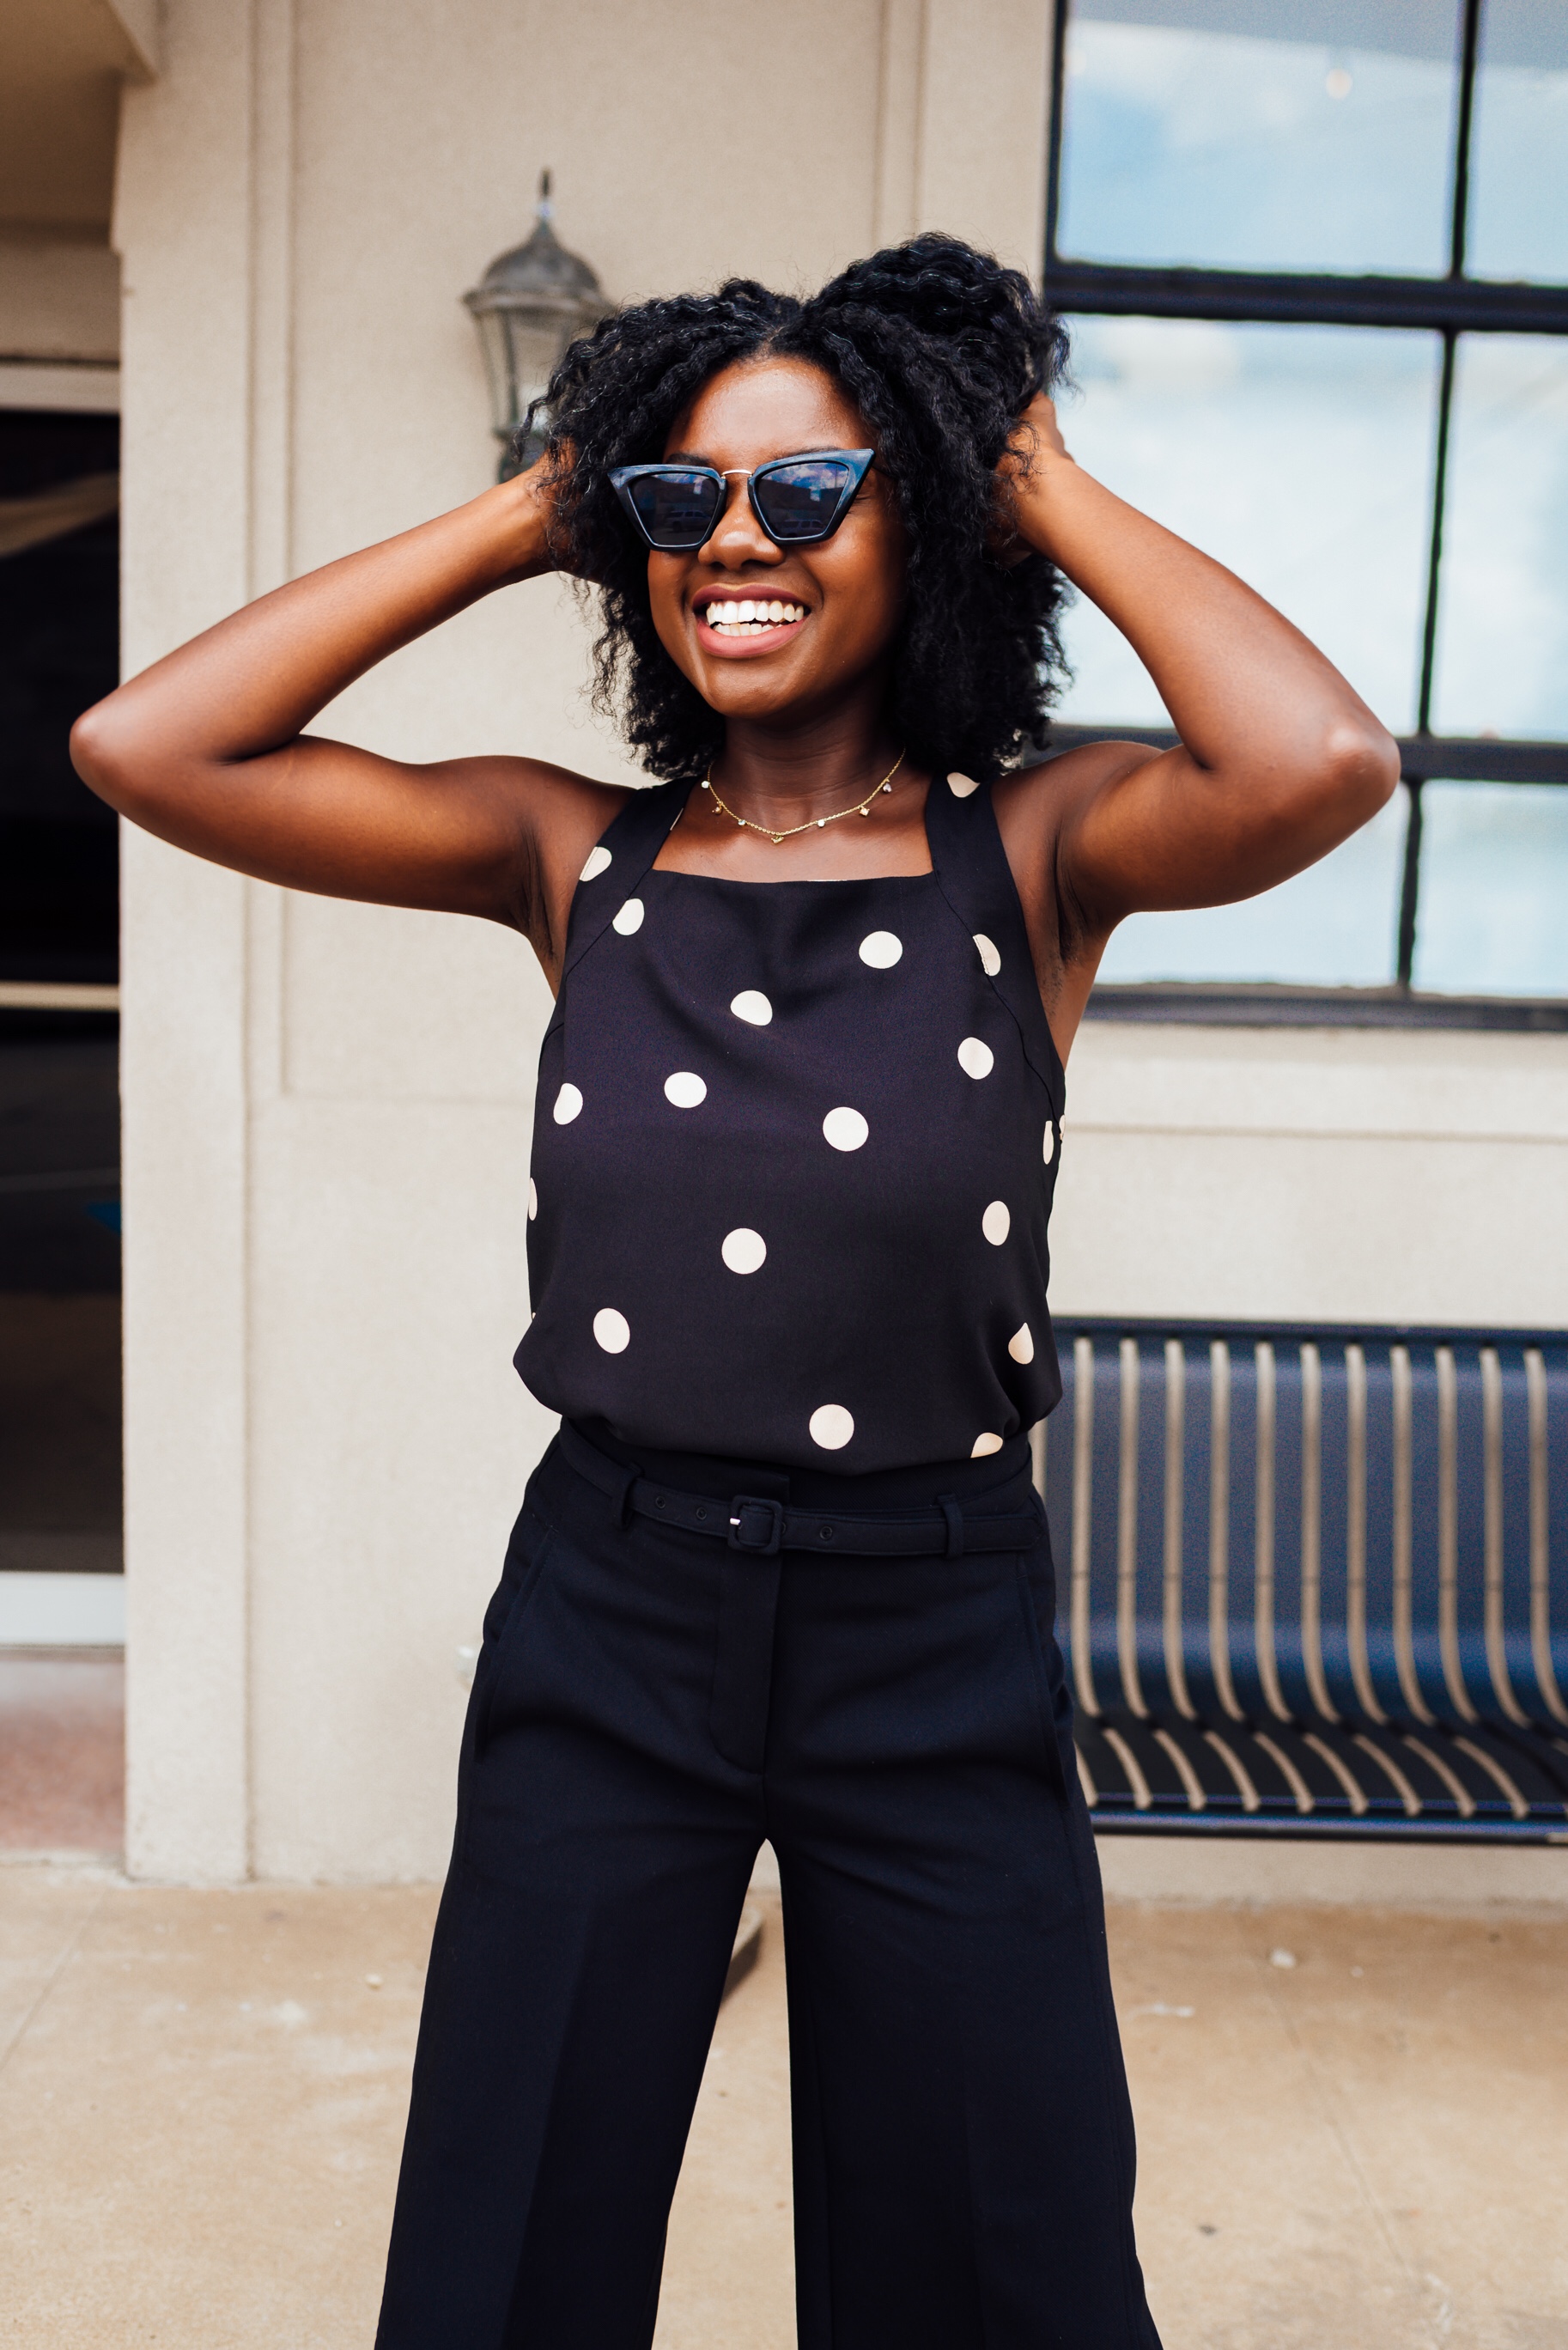 transition to fall, Authentically B, Brandy Gueary, Ann Taylor, large print polka dot, wide leg crop pants, twist out, braid out, snake print shoe, black fashion blogger, black models, Houston blogger, neutral style, natural hair styles, medium natural hair styles, 4c natural hair